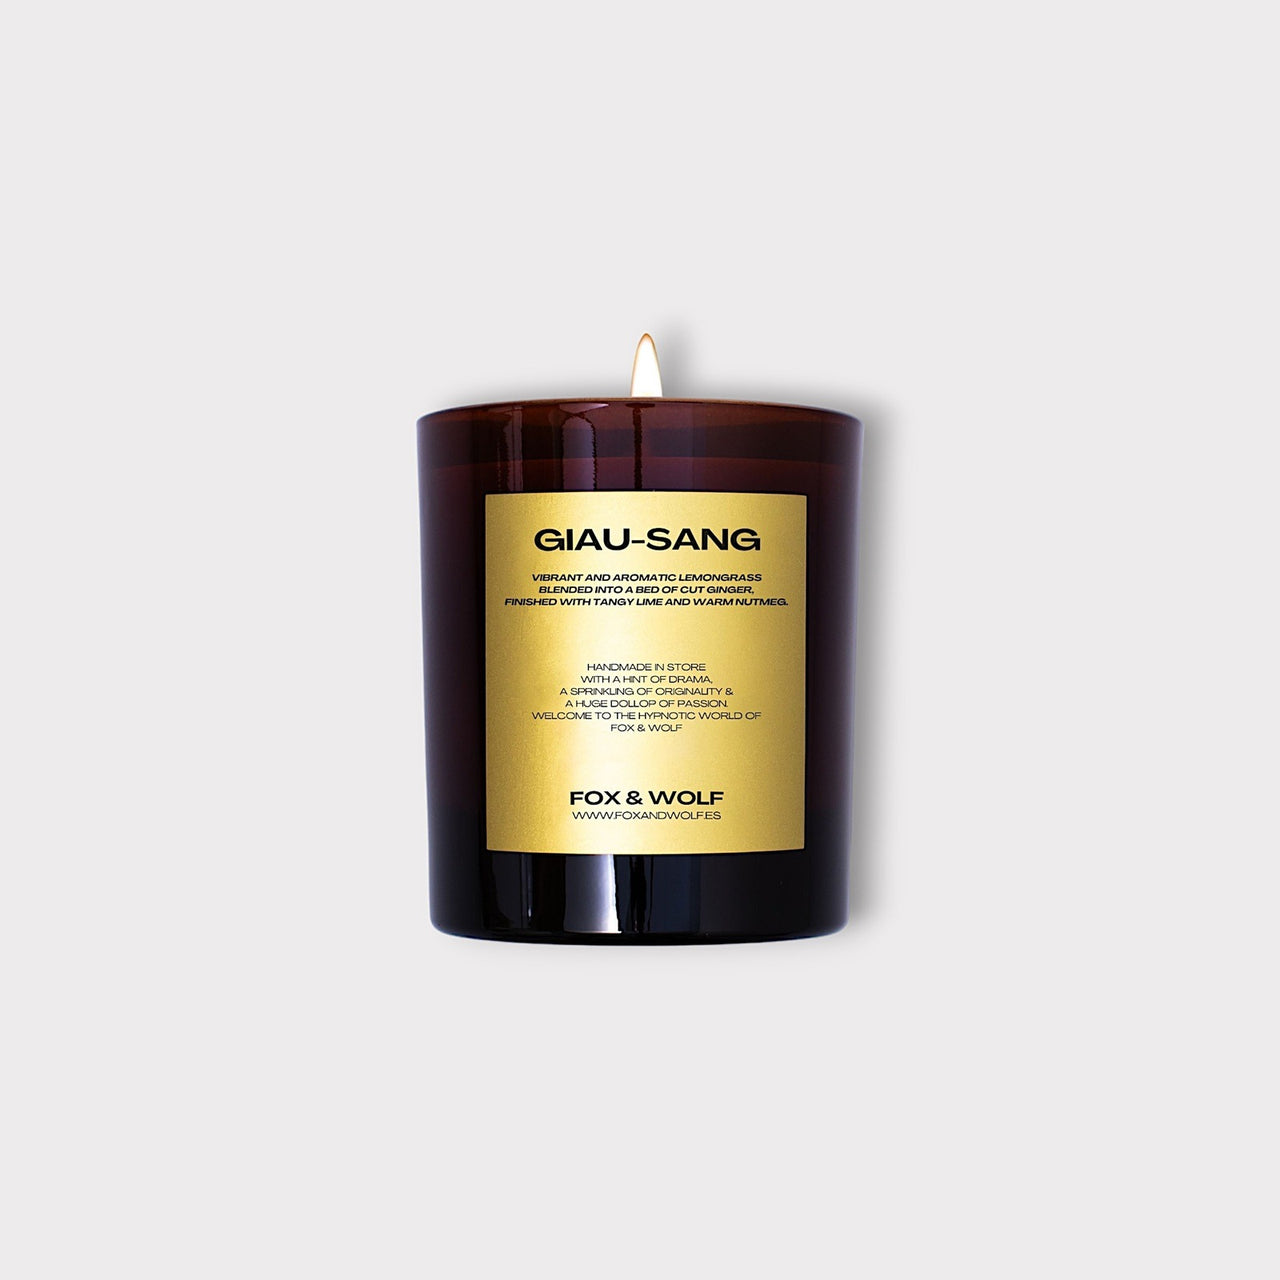 300 G GIAU-SANG SCENTED CANDLE